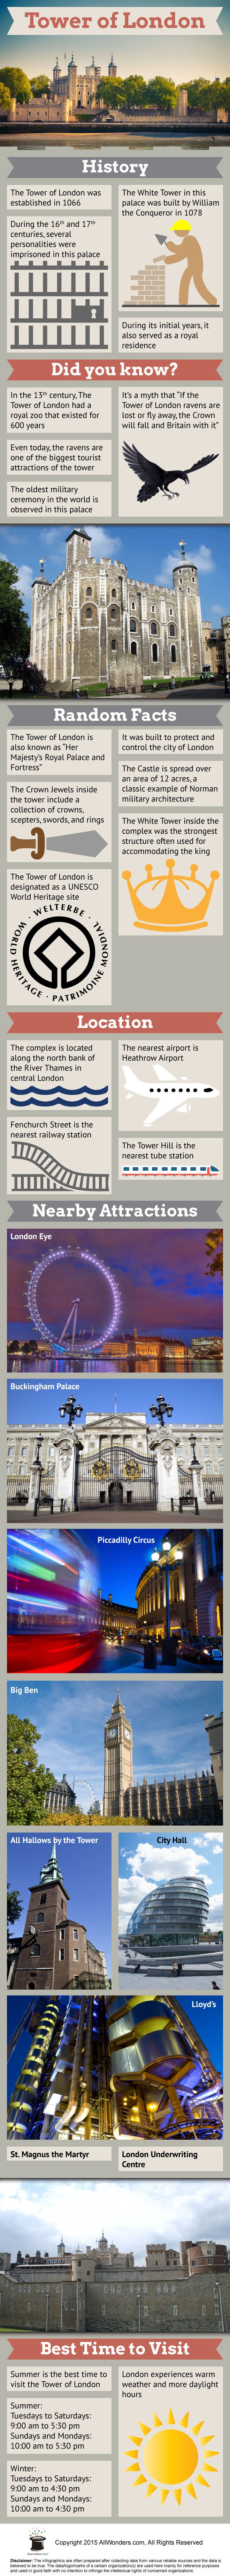 Tower of London Infographic